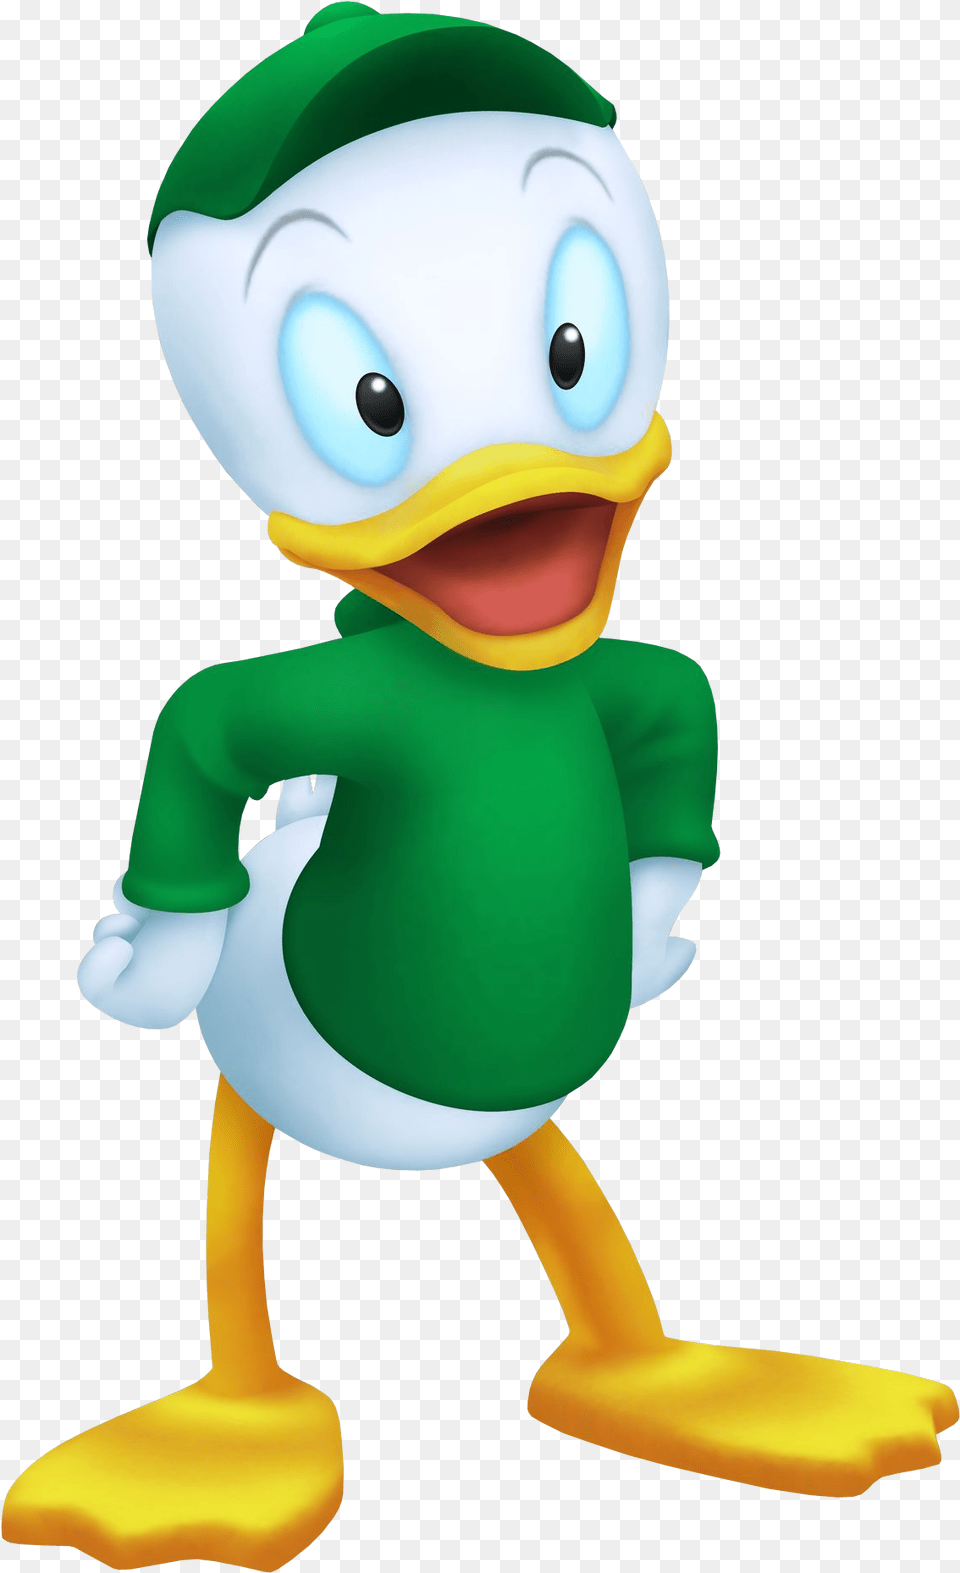 Free Download Of Donald Duck Image Without Background Huey Dewey And Louie Green, Nature, Outdoors, Snow, Snowman Png